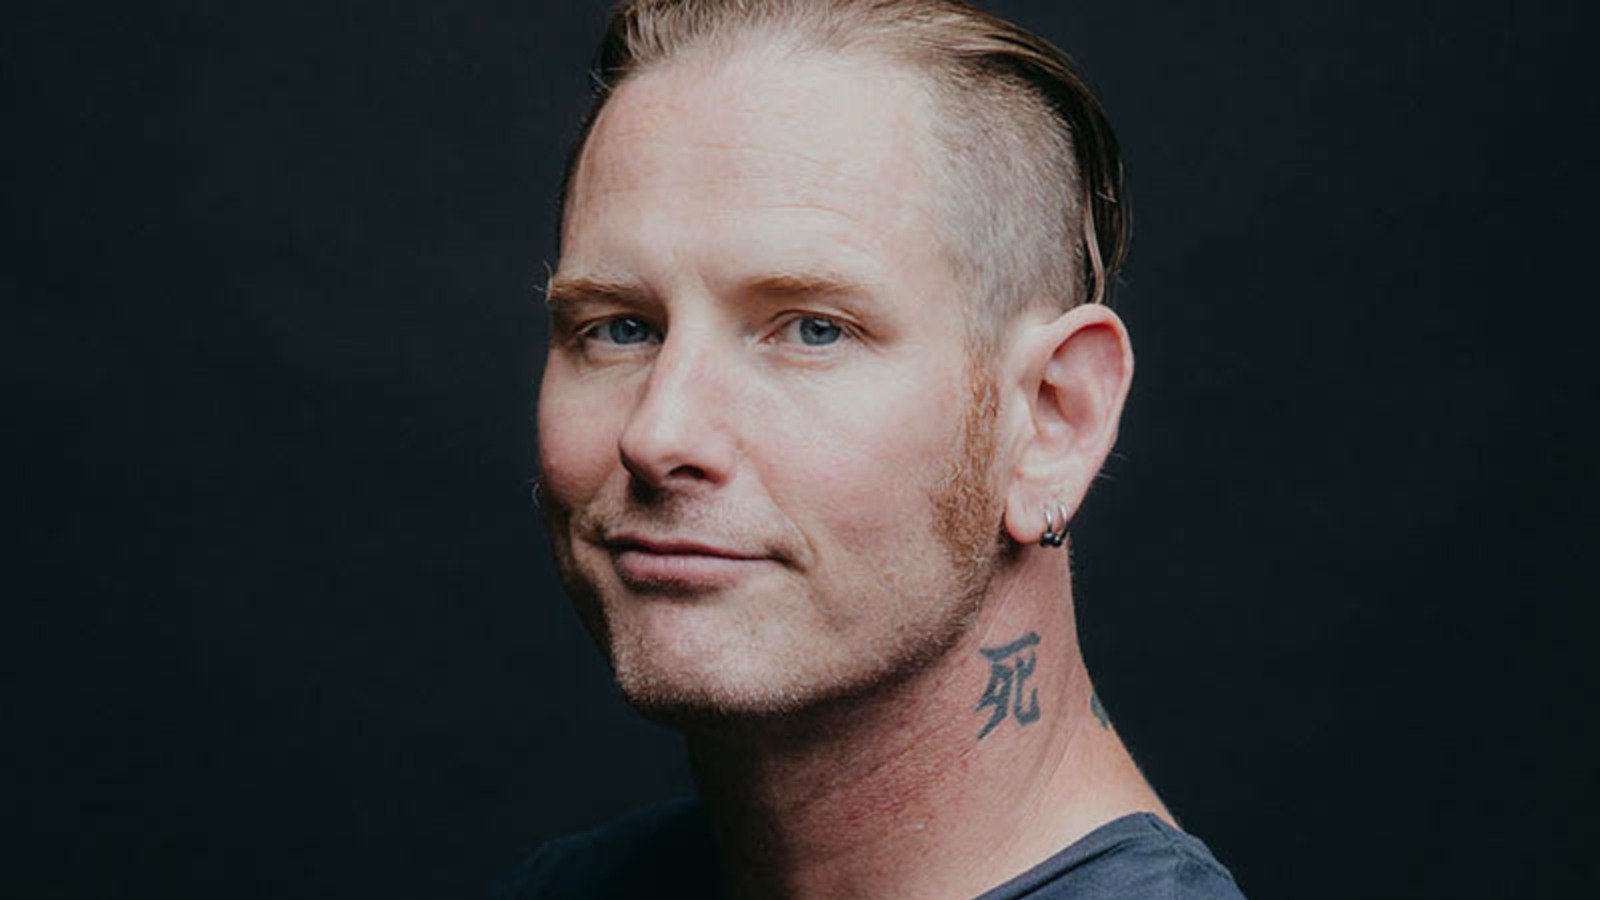 The Top 12 Songs That Corey Taylor Listed As His Favorites